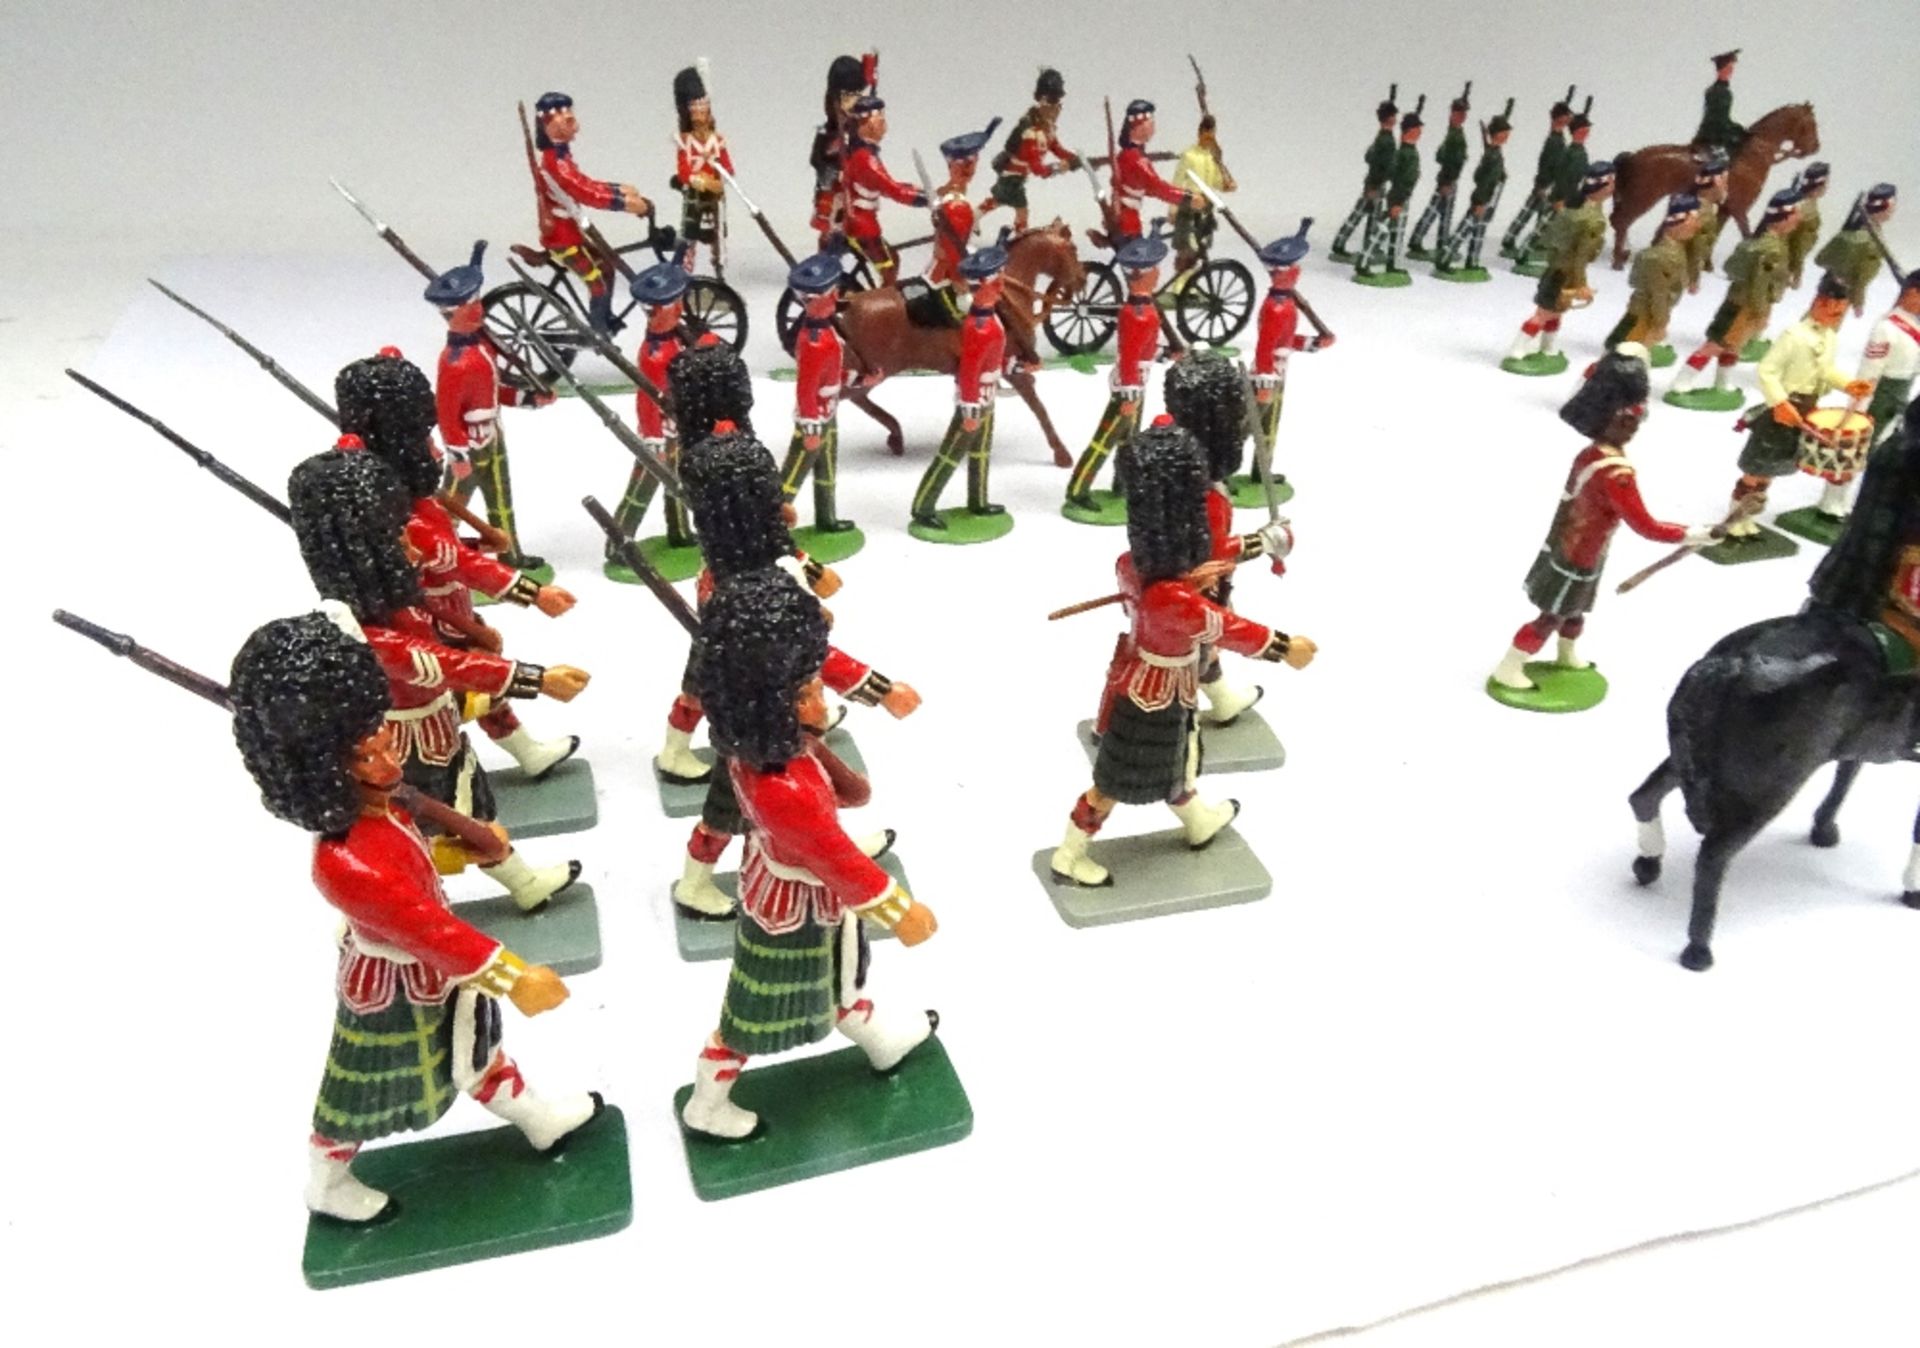 Highlander New Toy Soldiers - Image 7 of 7